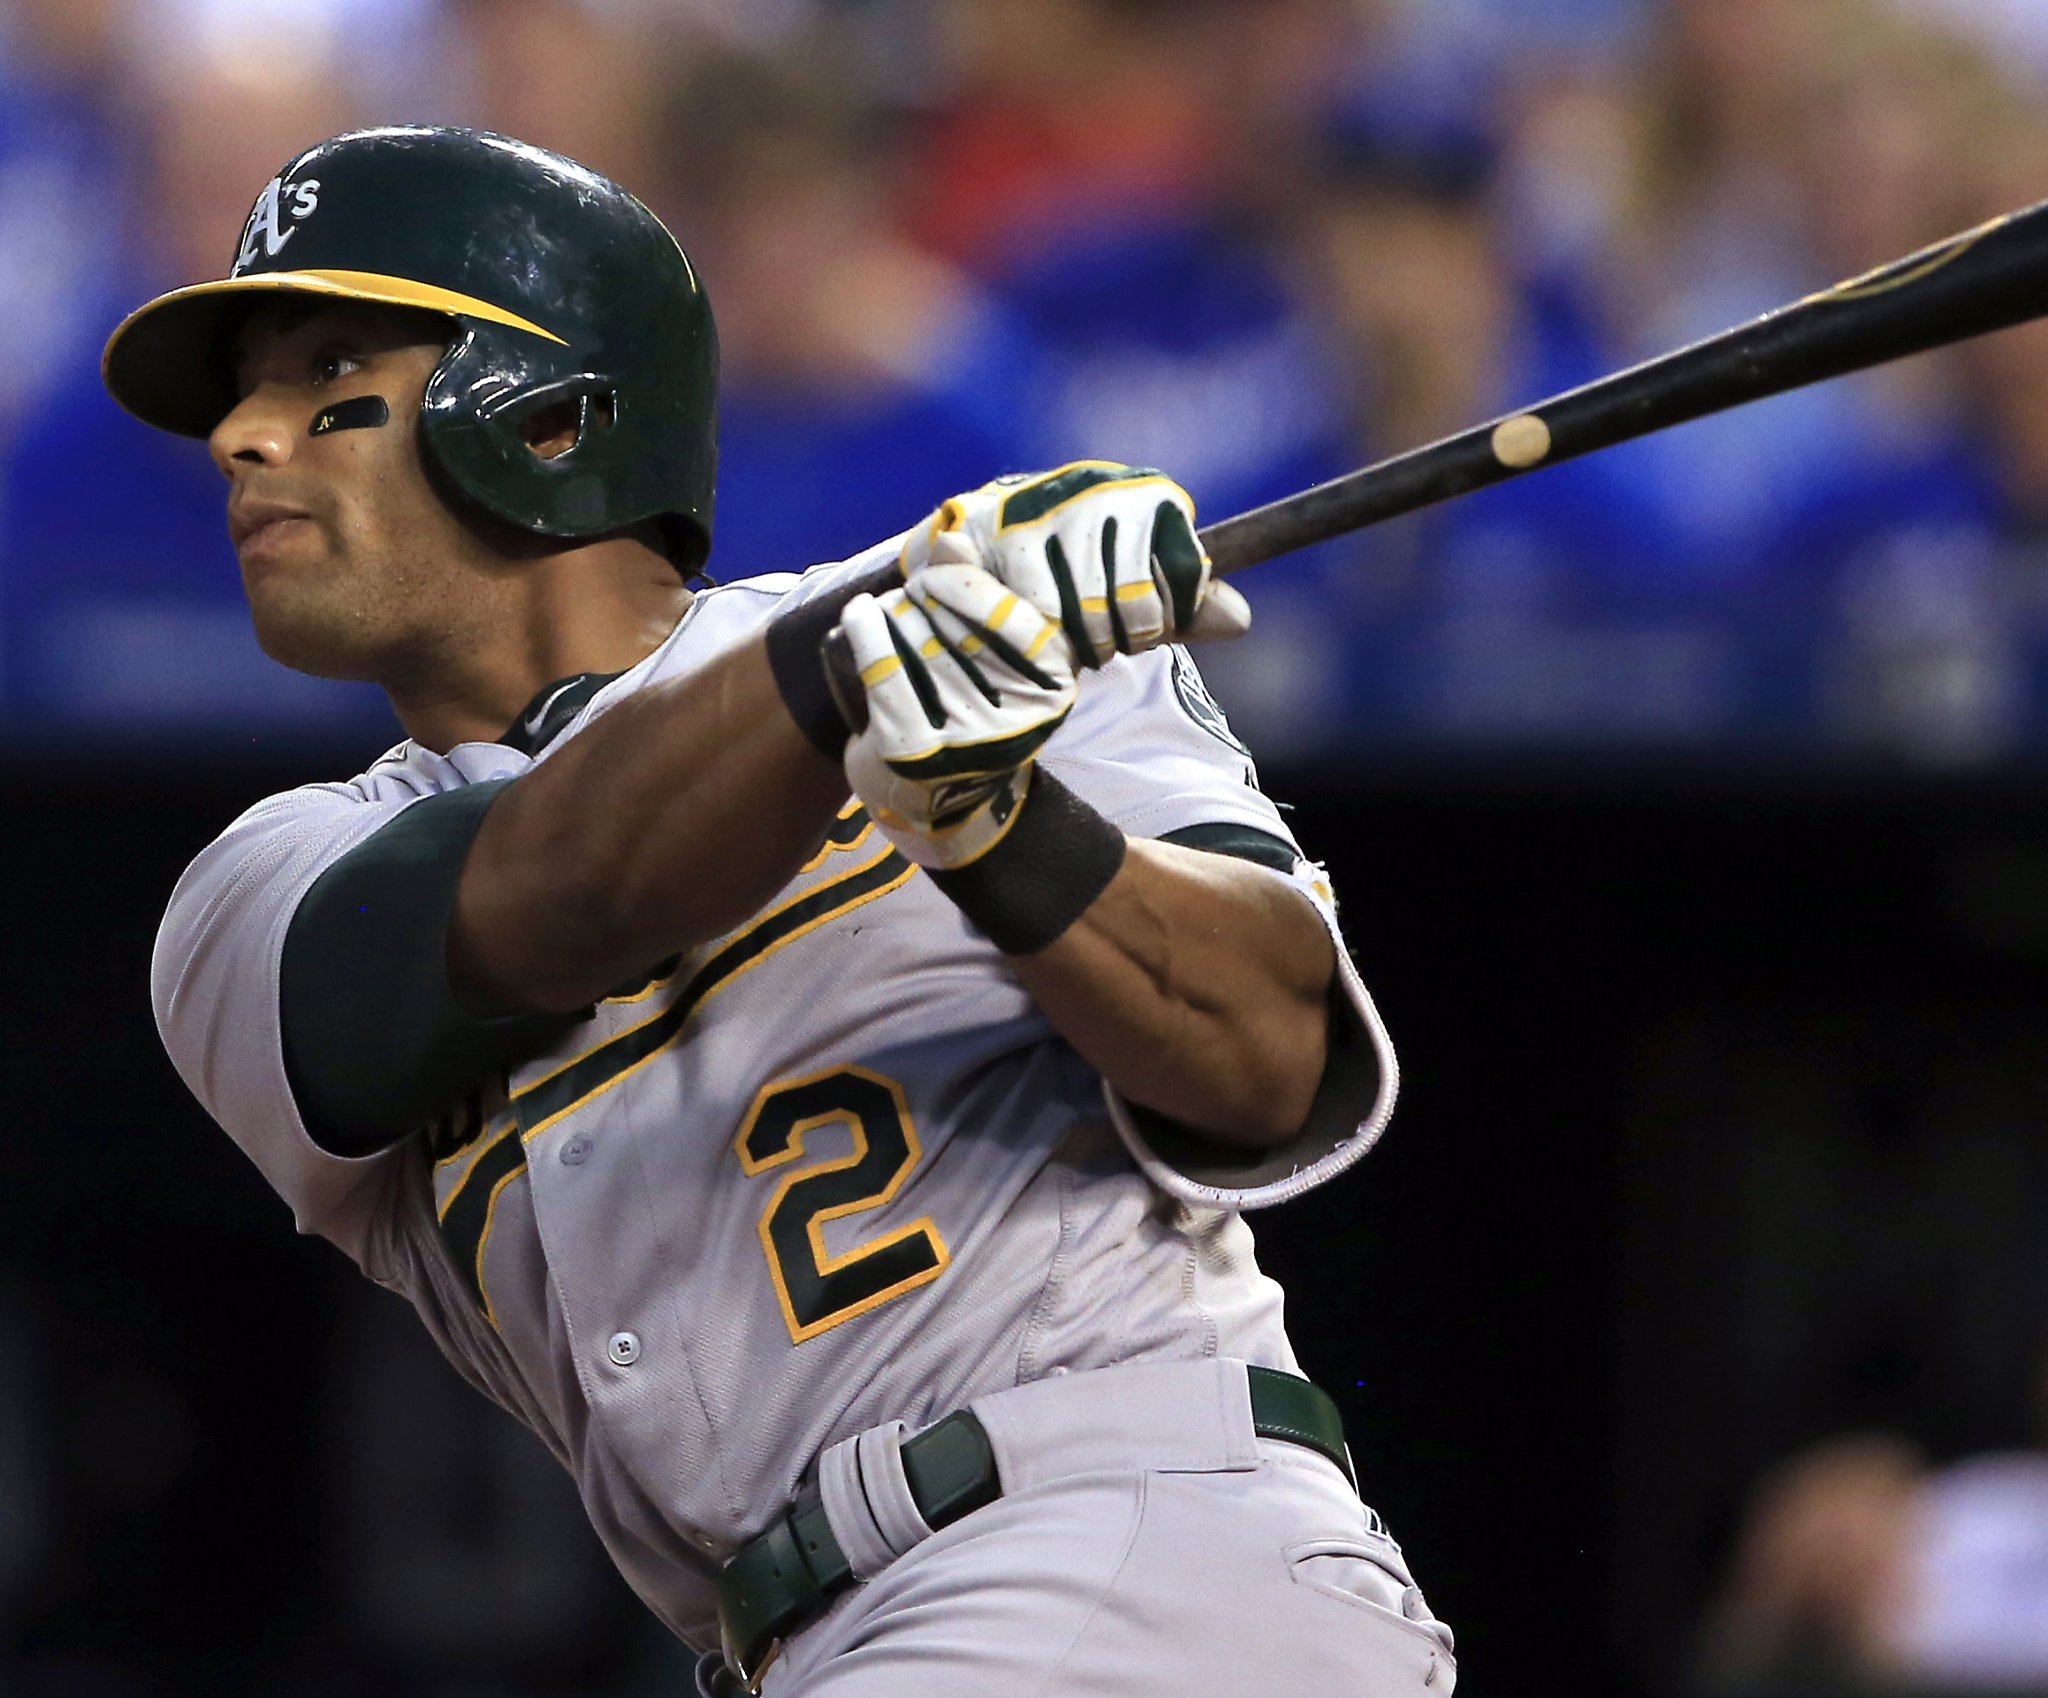 Khris Davis and the future of the Oakland A's - Athletics Nation